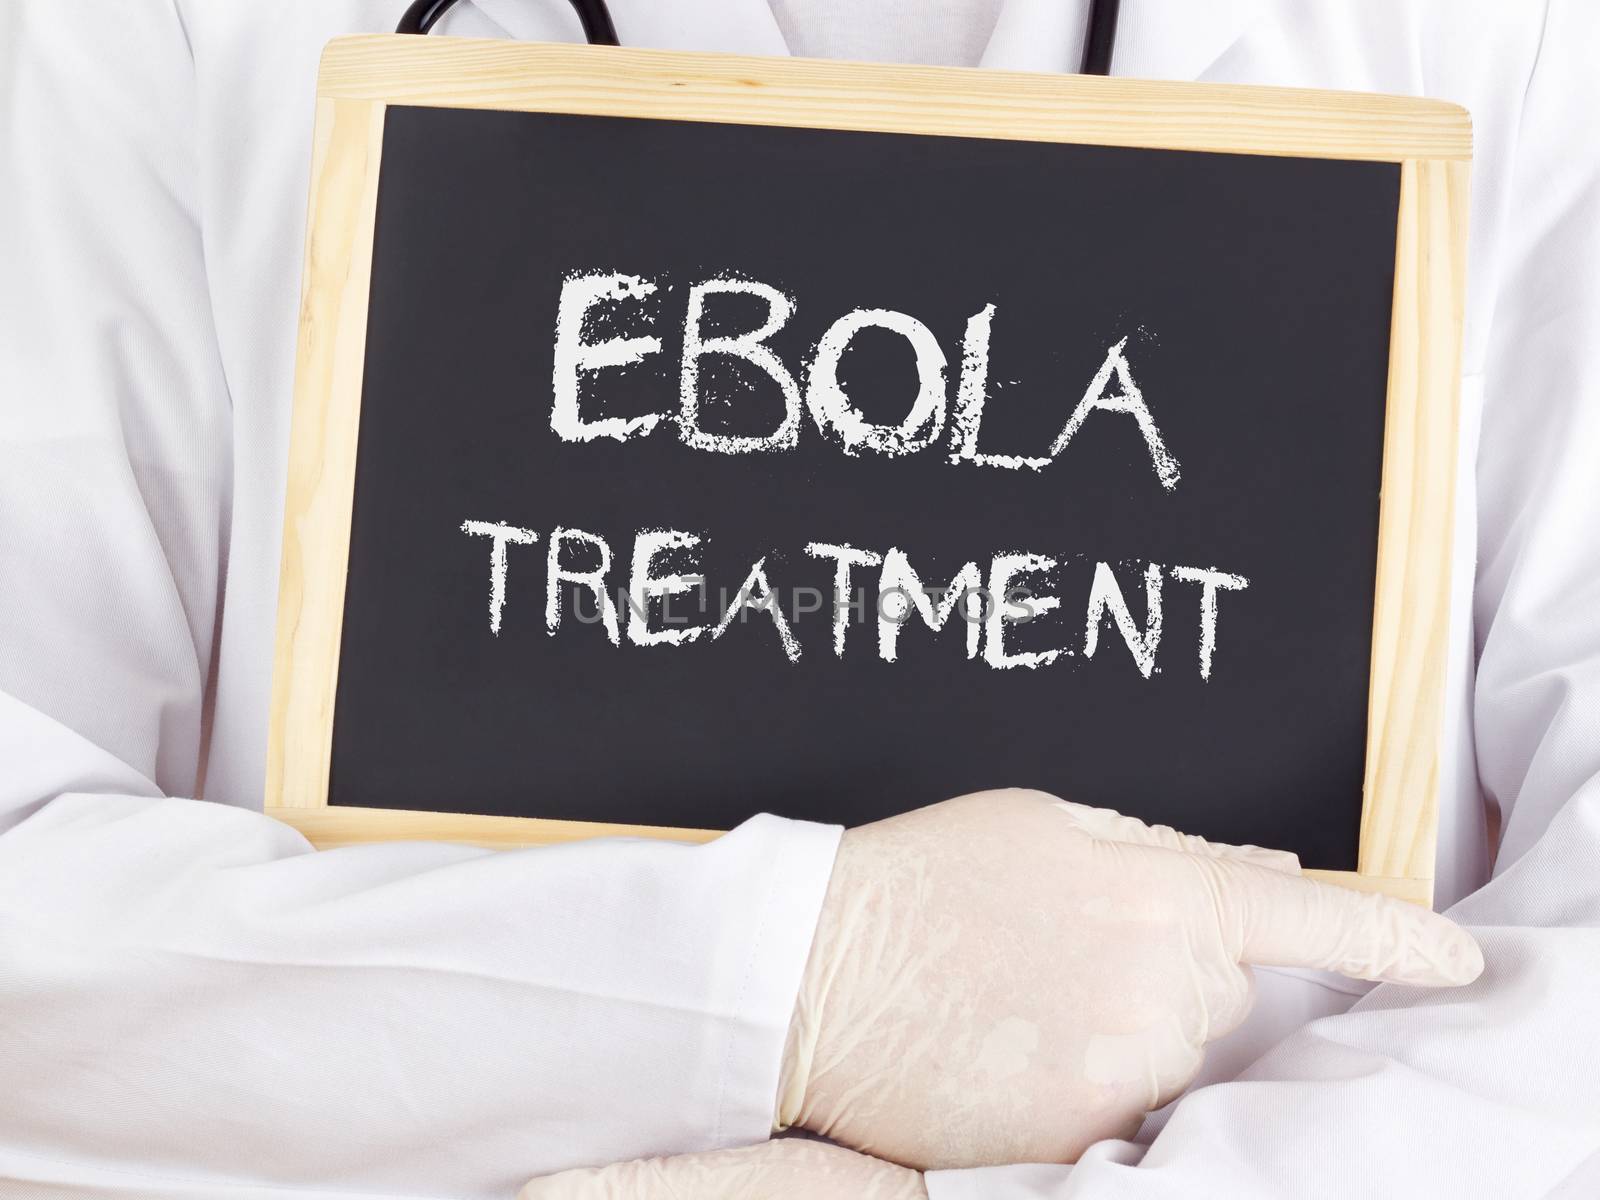 Doctor shows information: Ebola treatment by gwolters